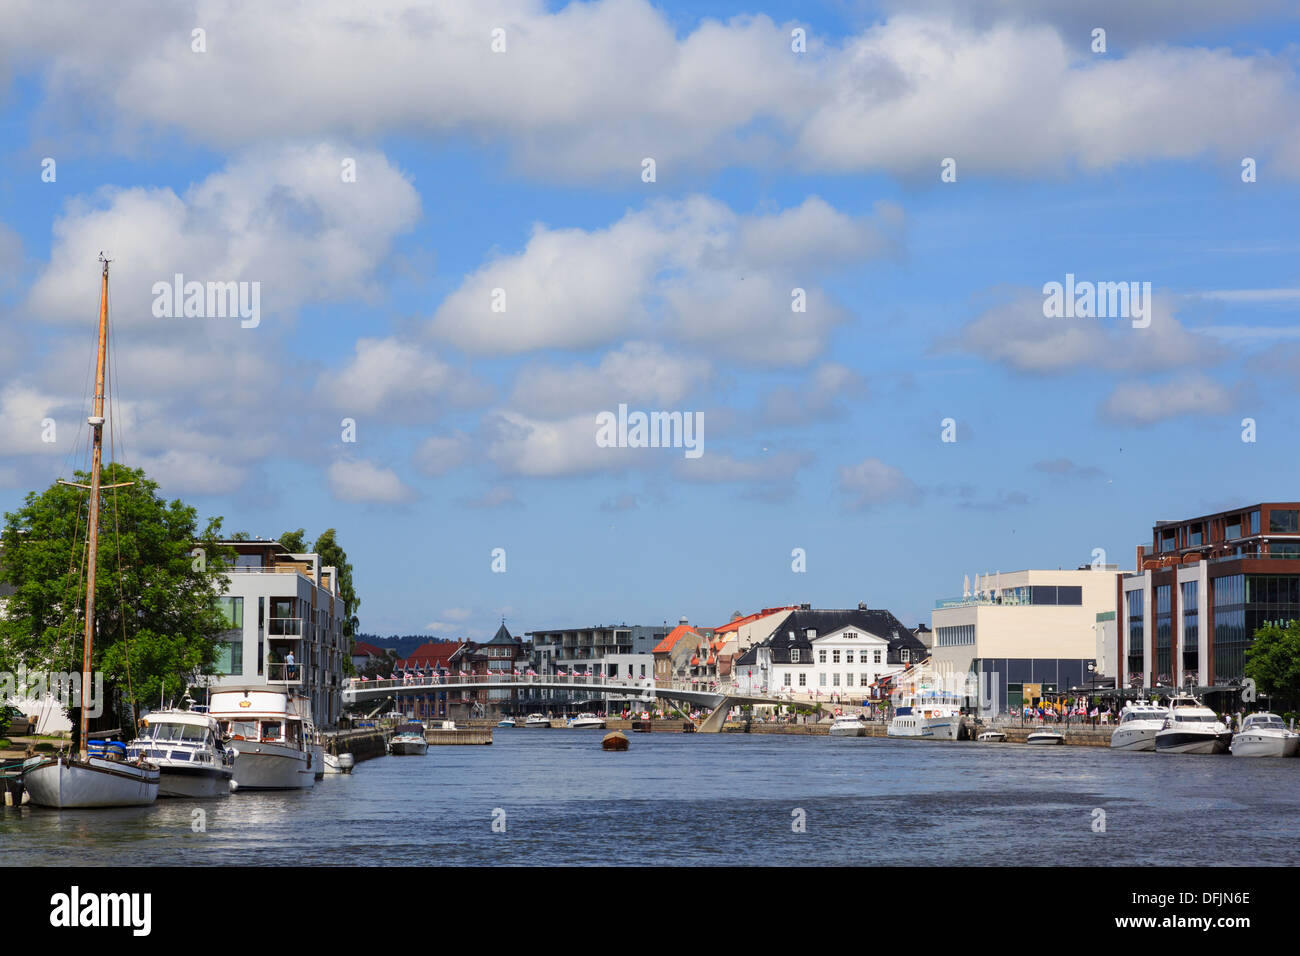 View to footbridge across River Glomma with boats moored in new town district of Fredrikstad, Ostfold, Norway, Scandinavia Stock Photo